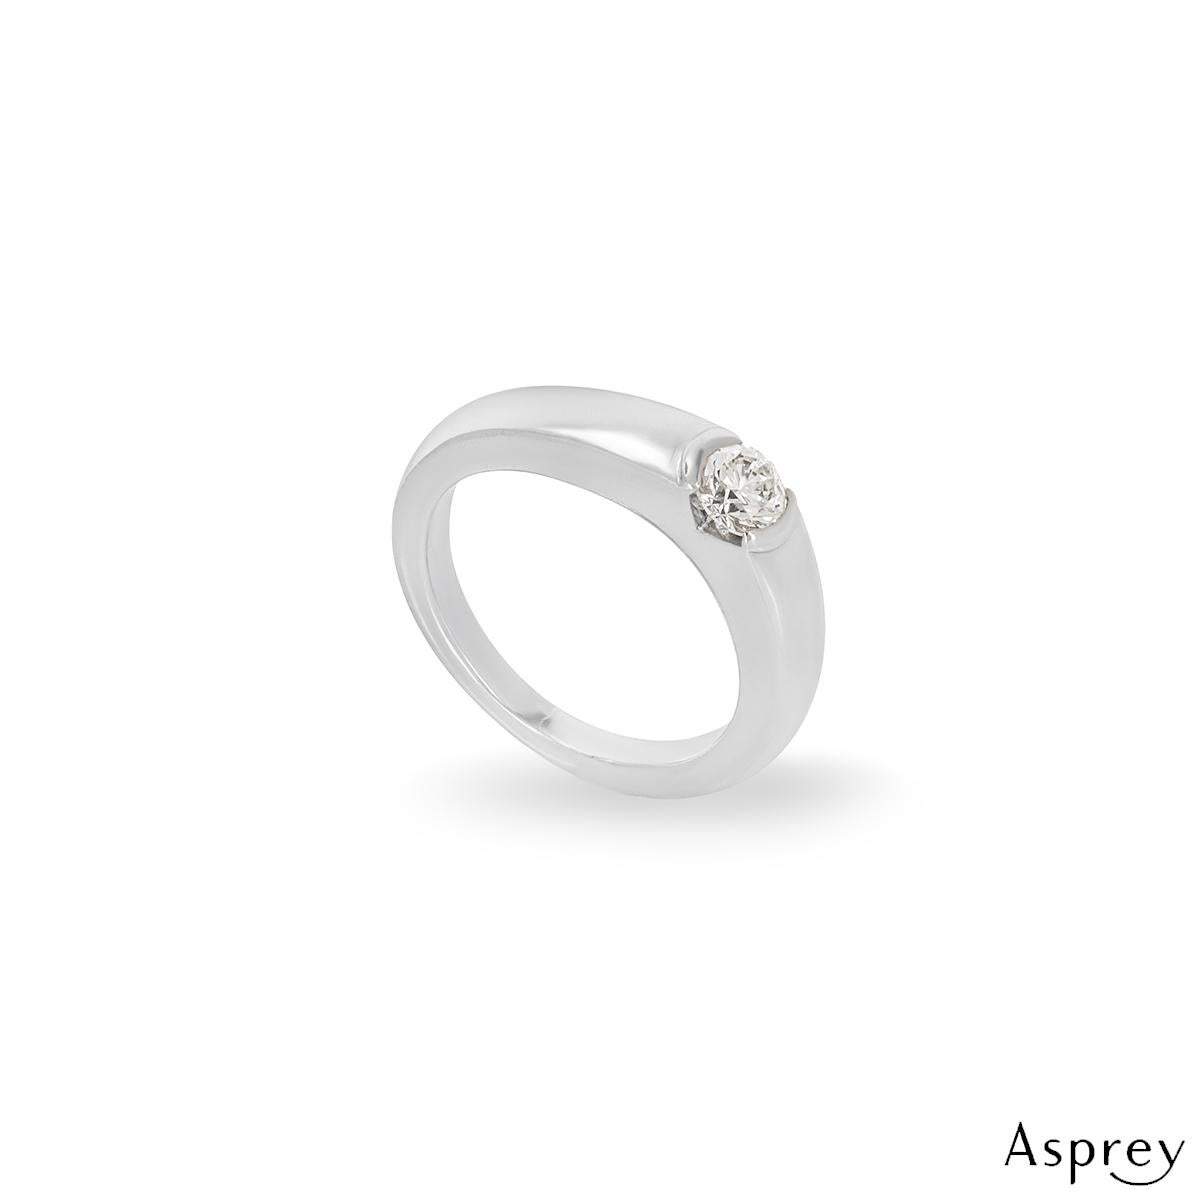 A stunning Asprey round brilliant cut diamond ring in platinum with matching wedding band. The rub over set round brilliant cut diamond weighs 0.32ct is H colour and VS1 clarity. The ring is currently a UK size G and US 3 3/8.

The plain 4mm